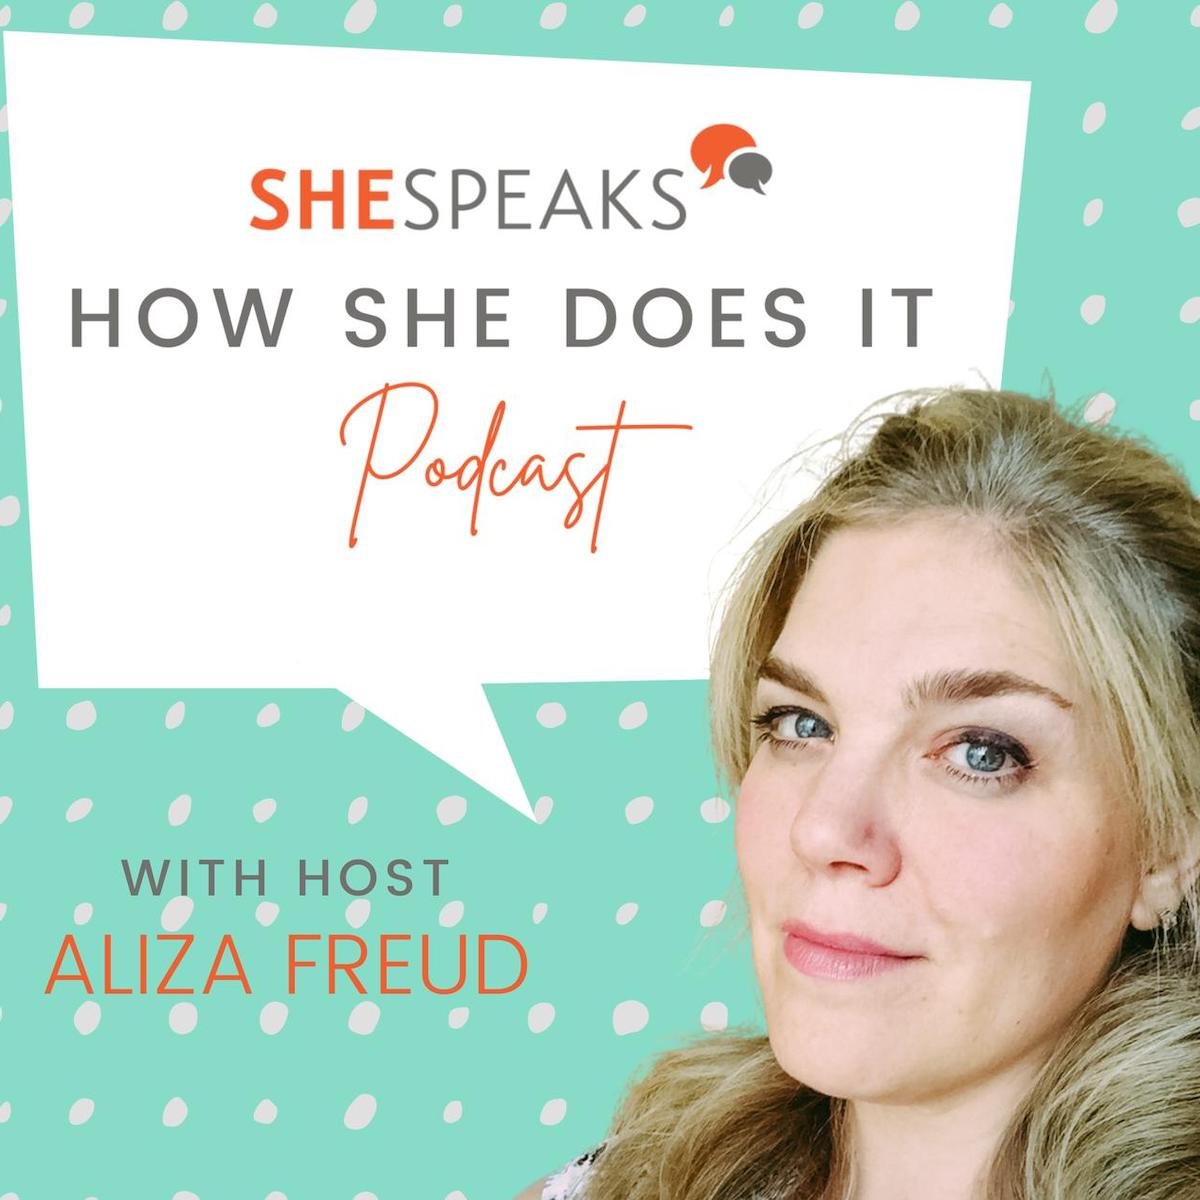 SheSpeaks - How She Does It podcast with Aliza Freud